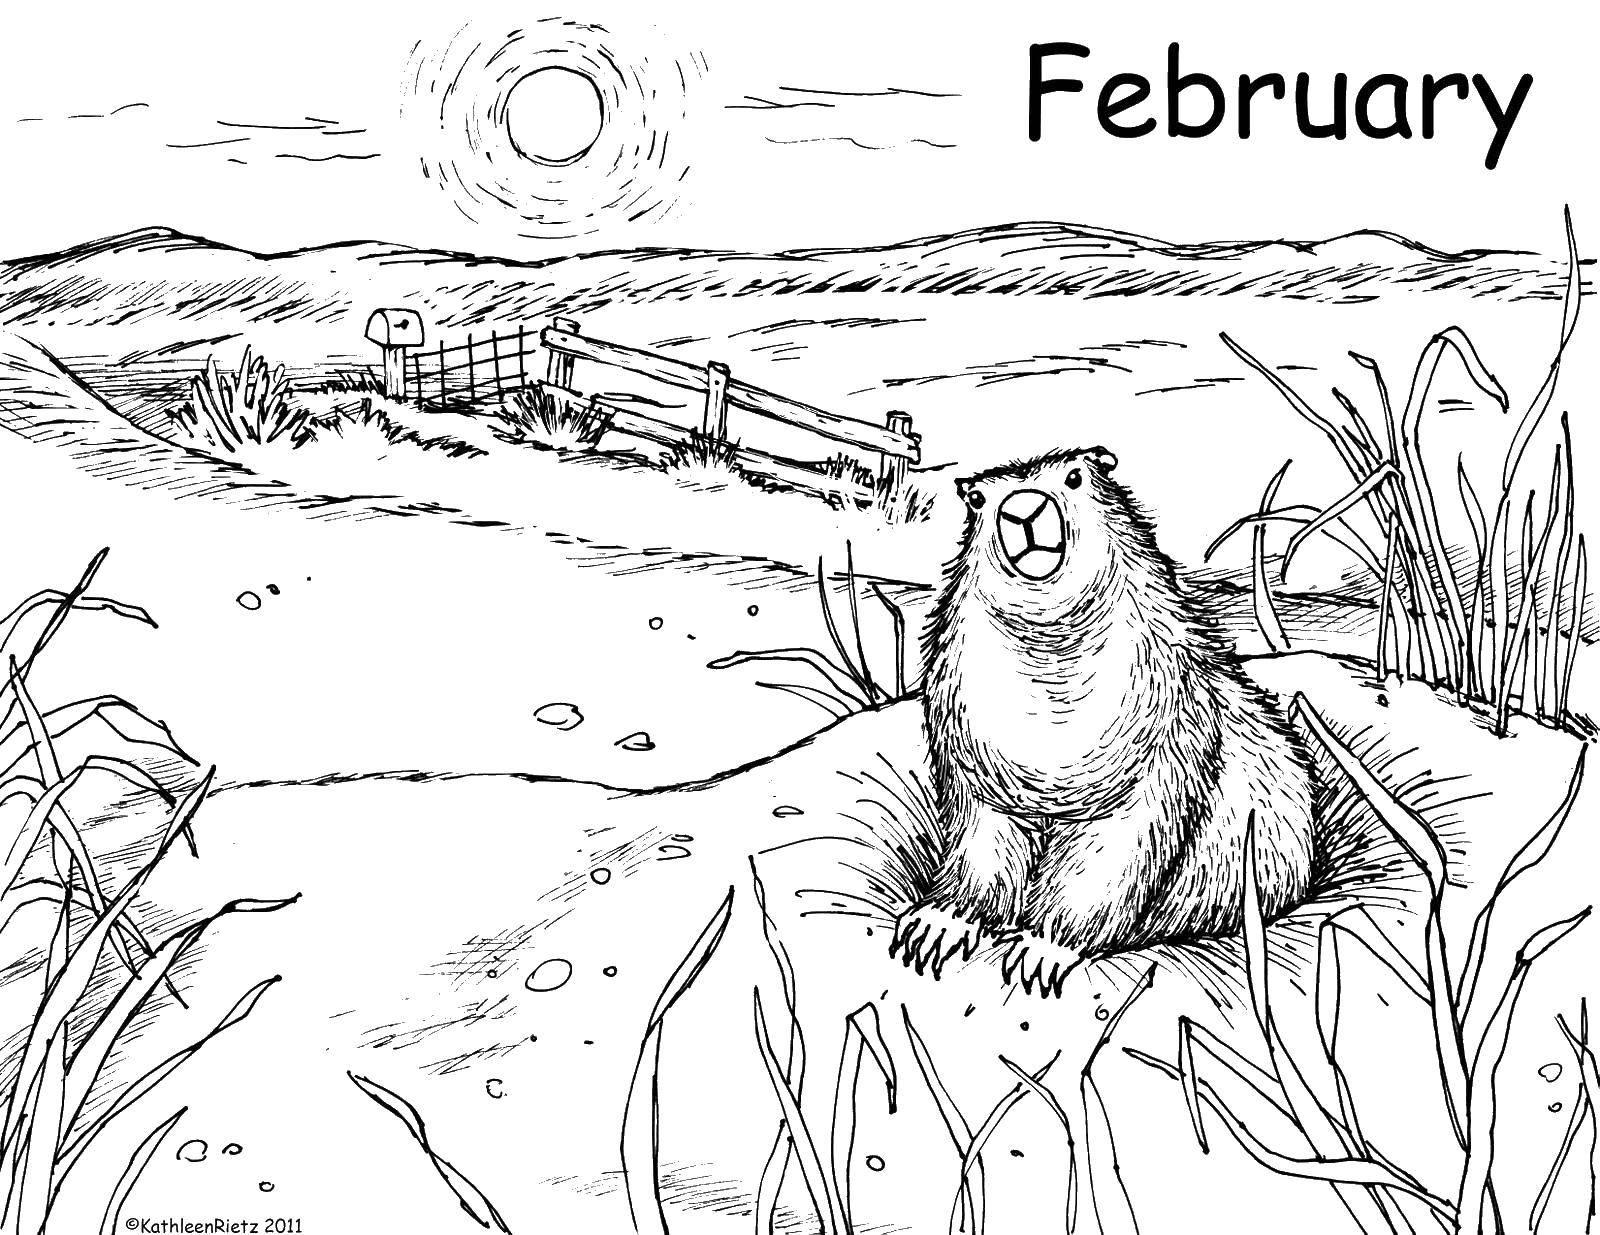 Coloring The mole in February. Category Nature. Tags:  mole.